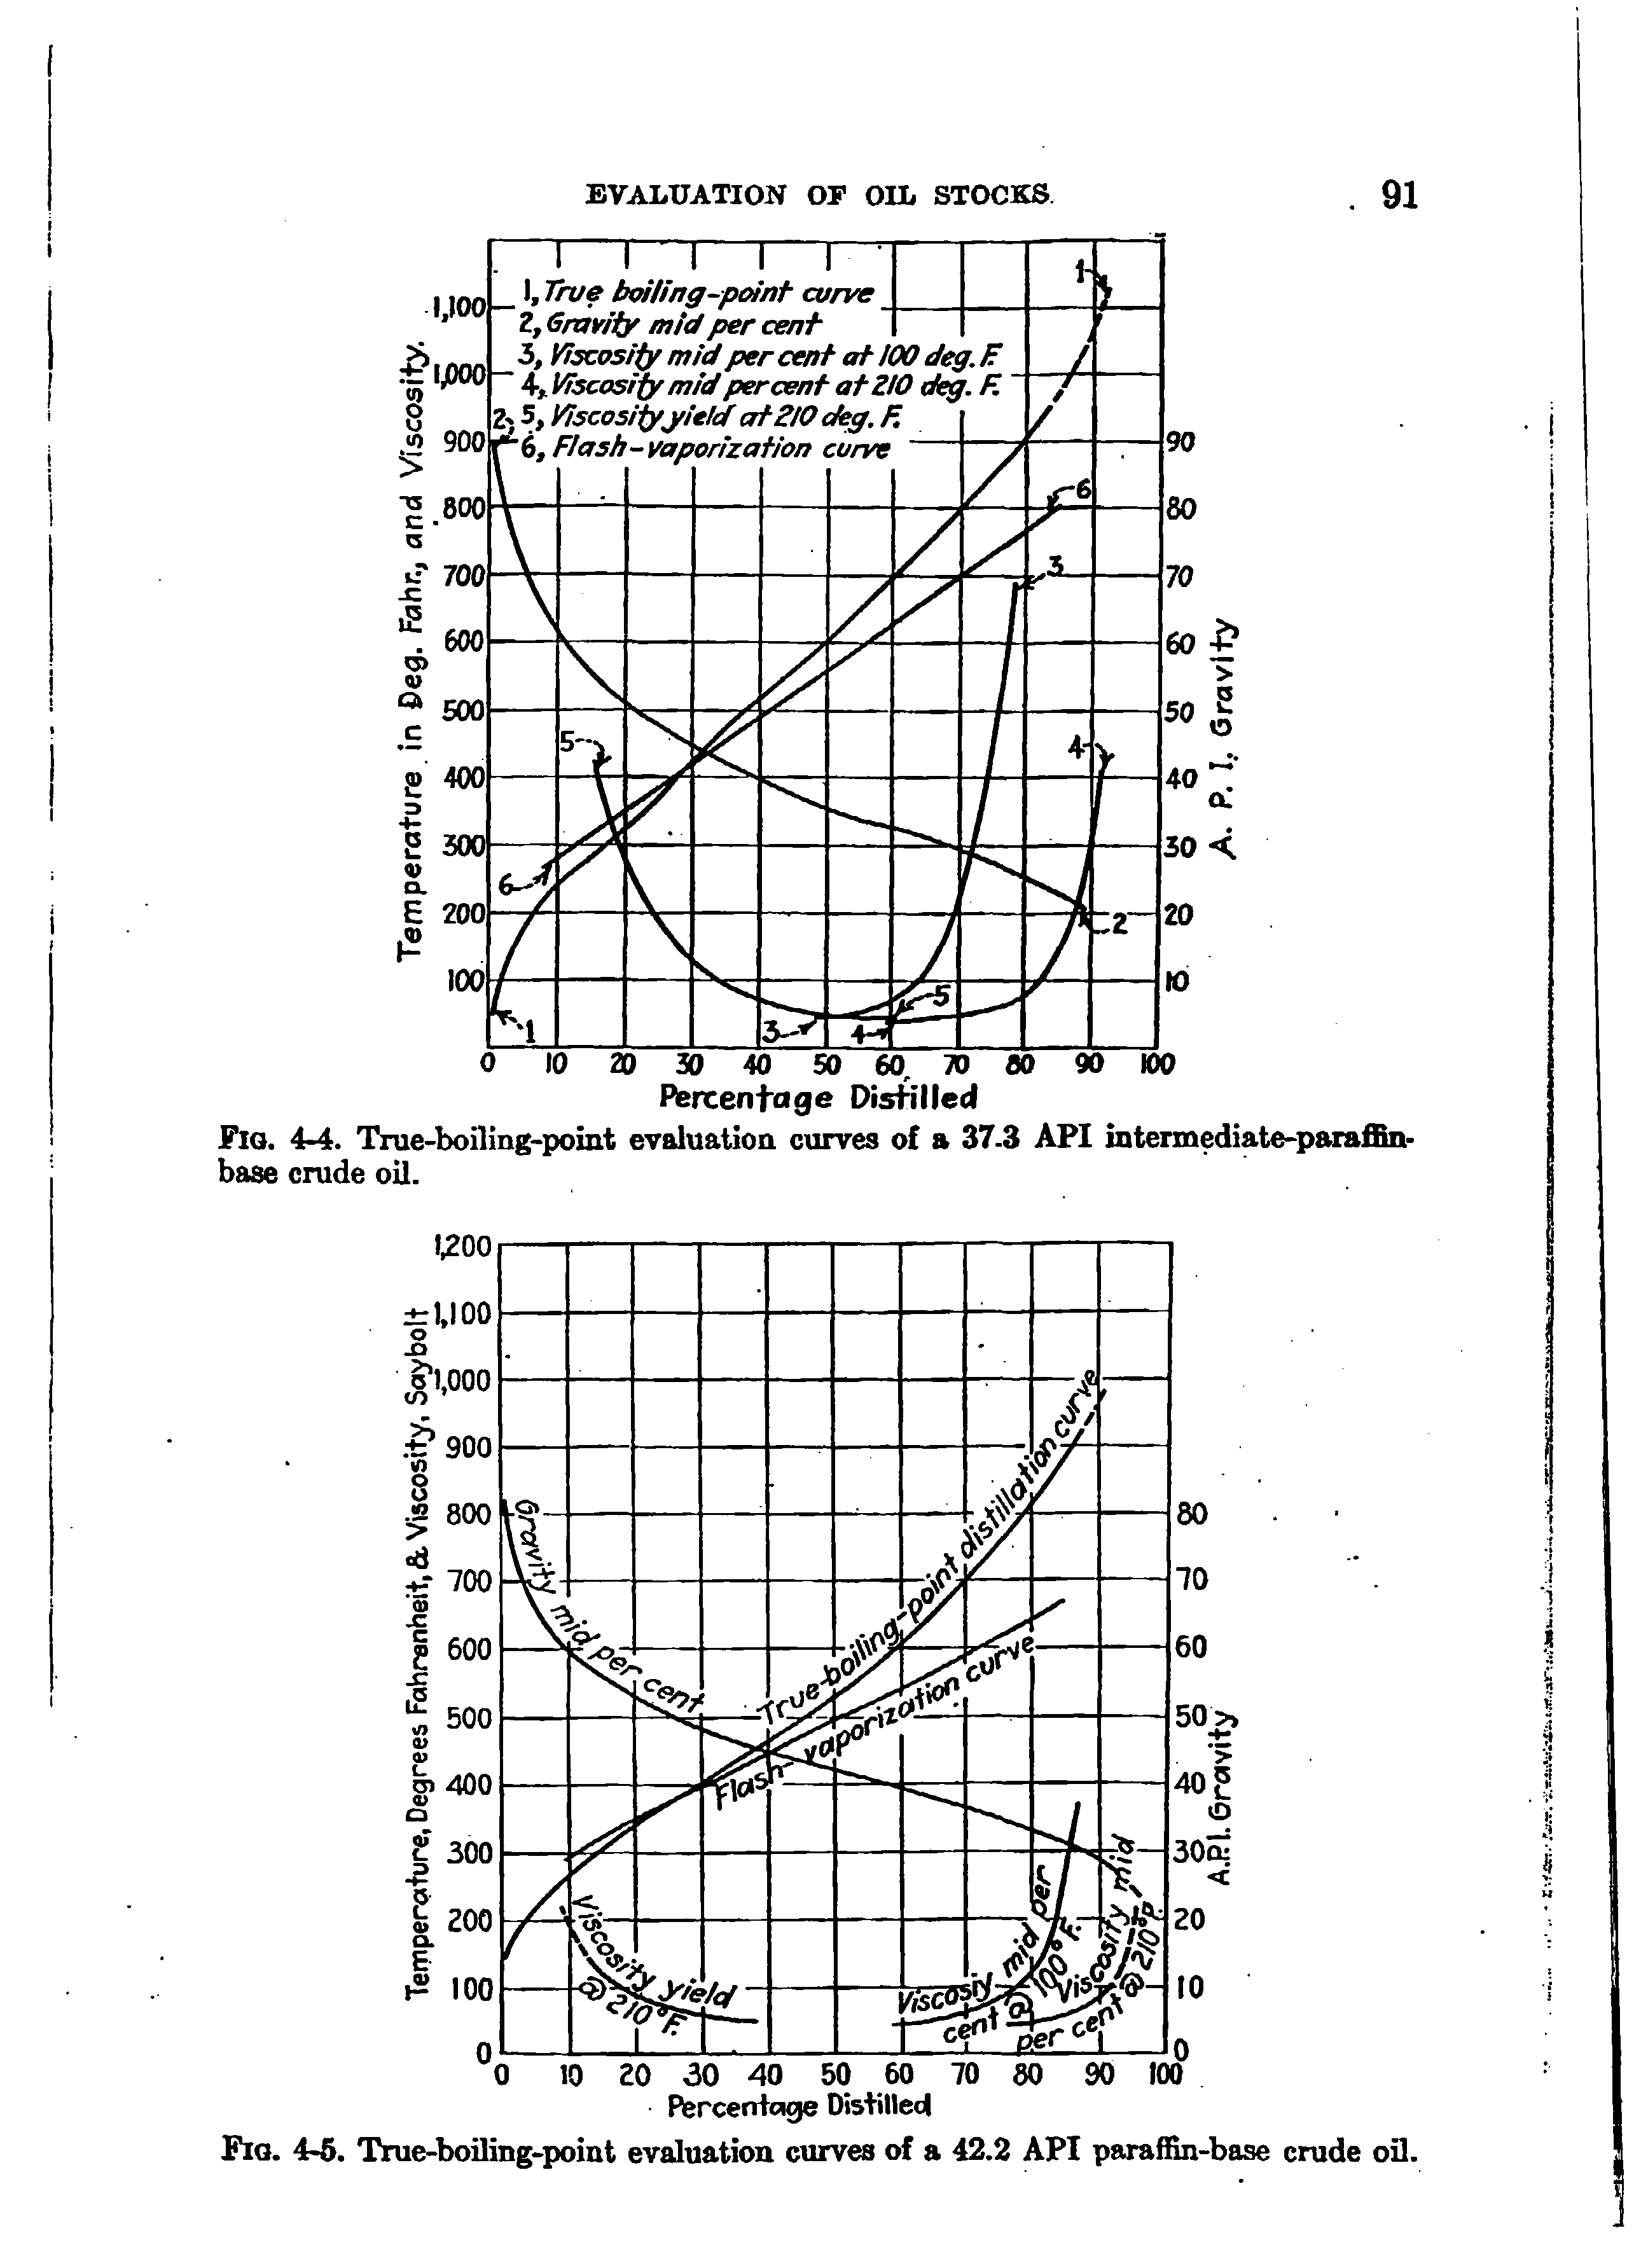 Fig. 4-5. Tnie-boiling-point evaluation curves of a 42.2 API paraffin-base crude oil.